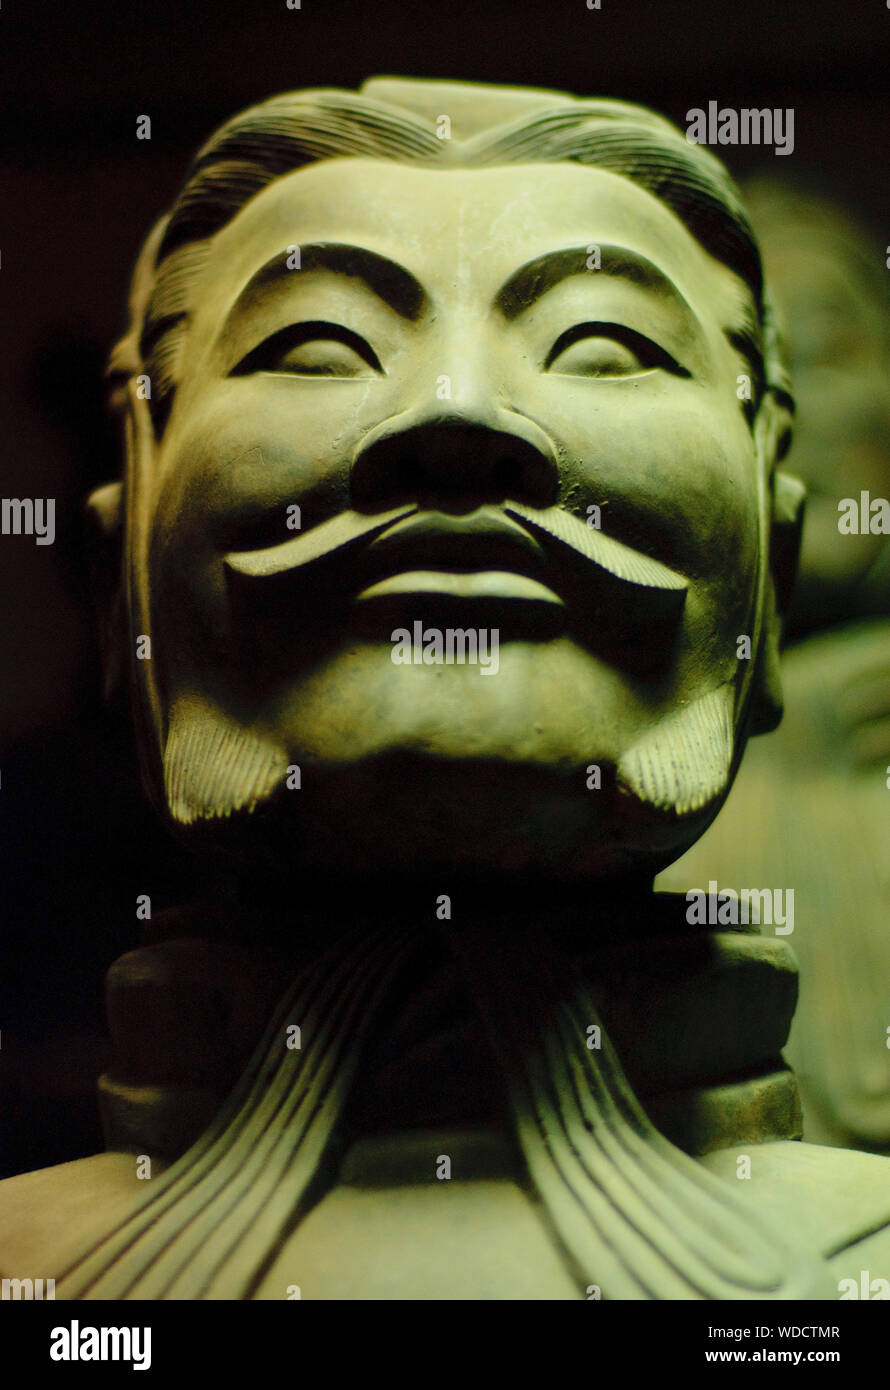 Terracotta army general at the Qin Shi Huang's mausoleum in Xi'an, China. Stock Photo